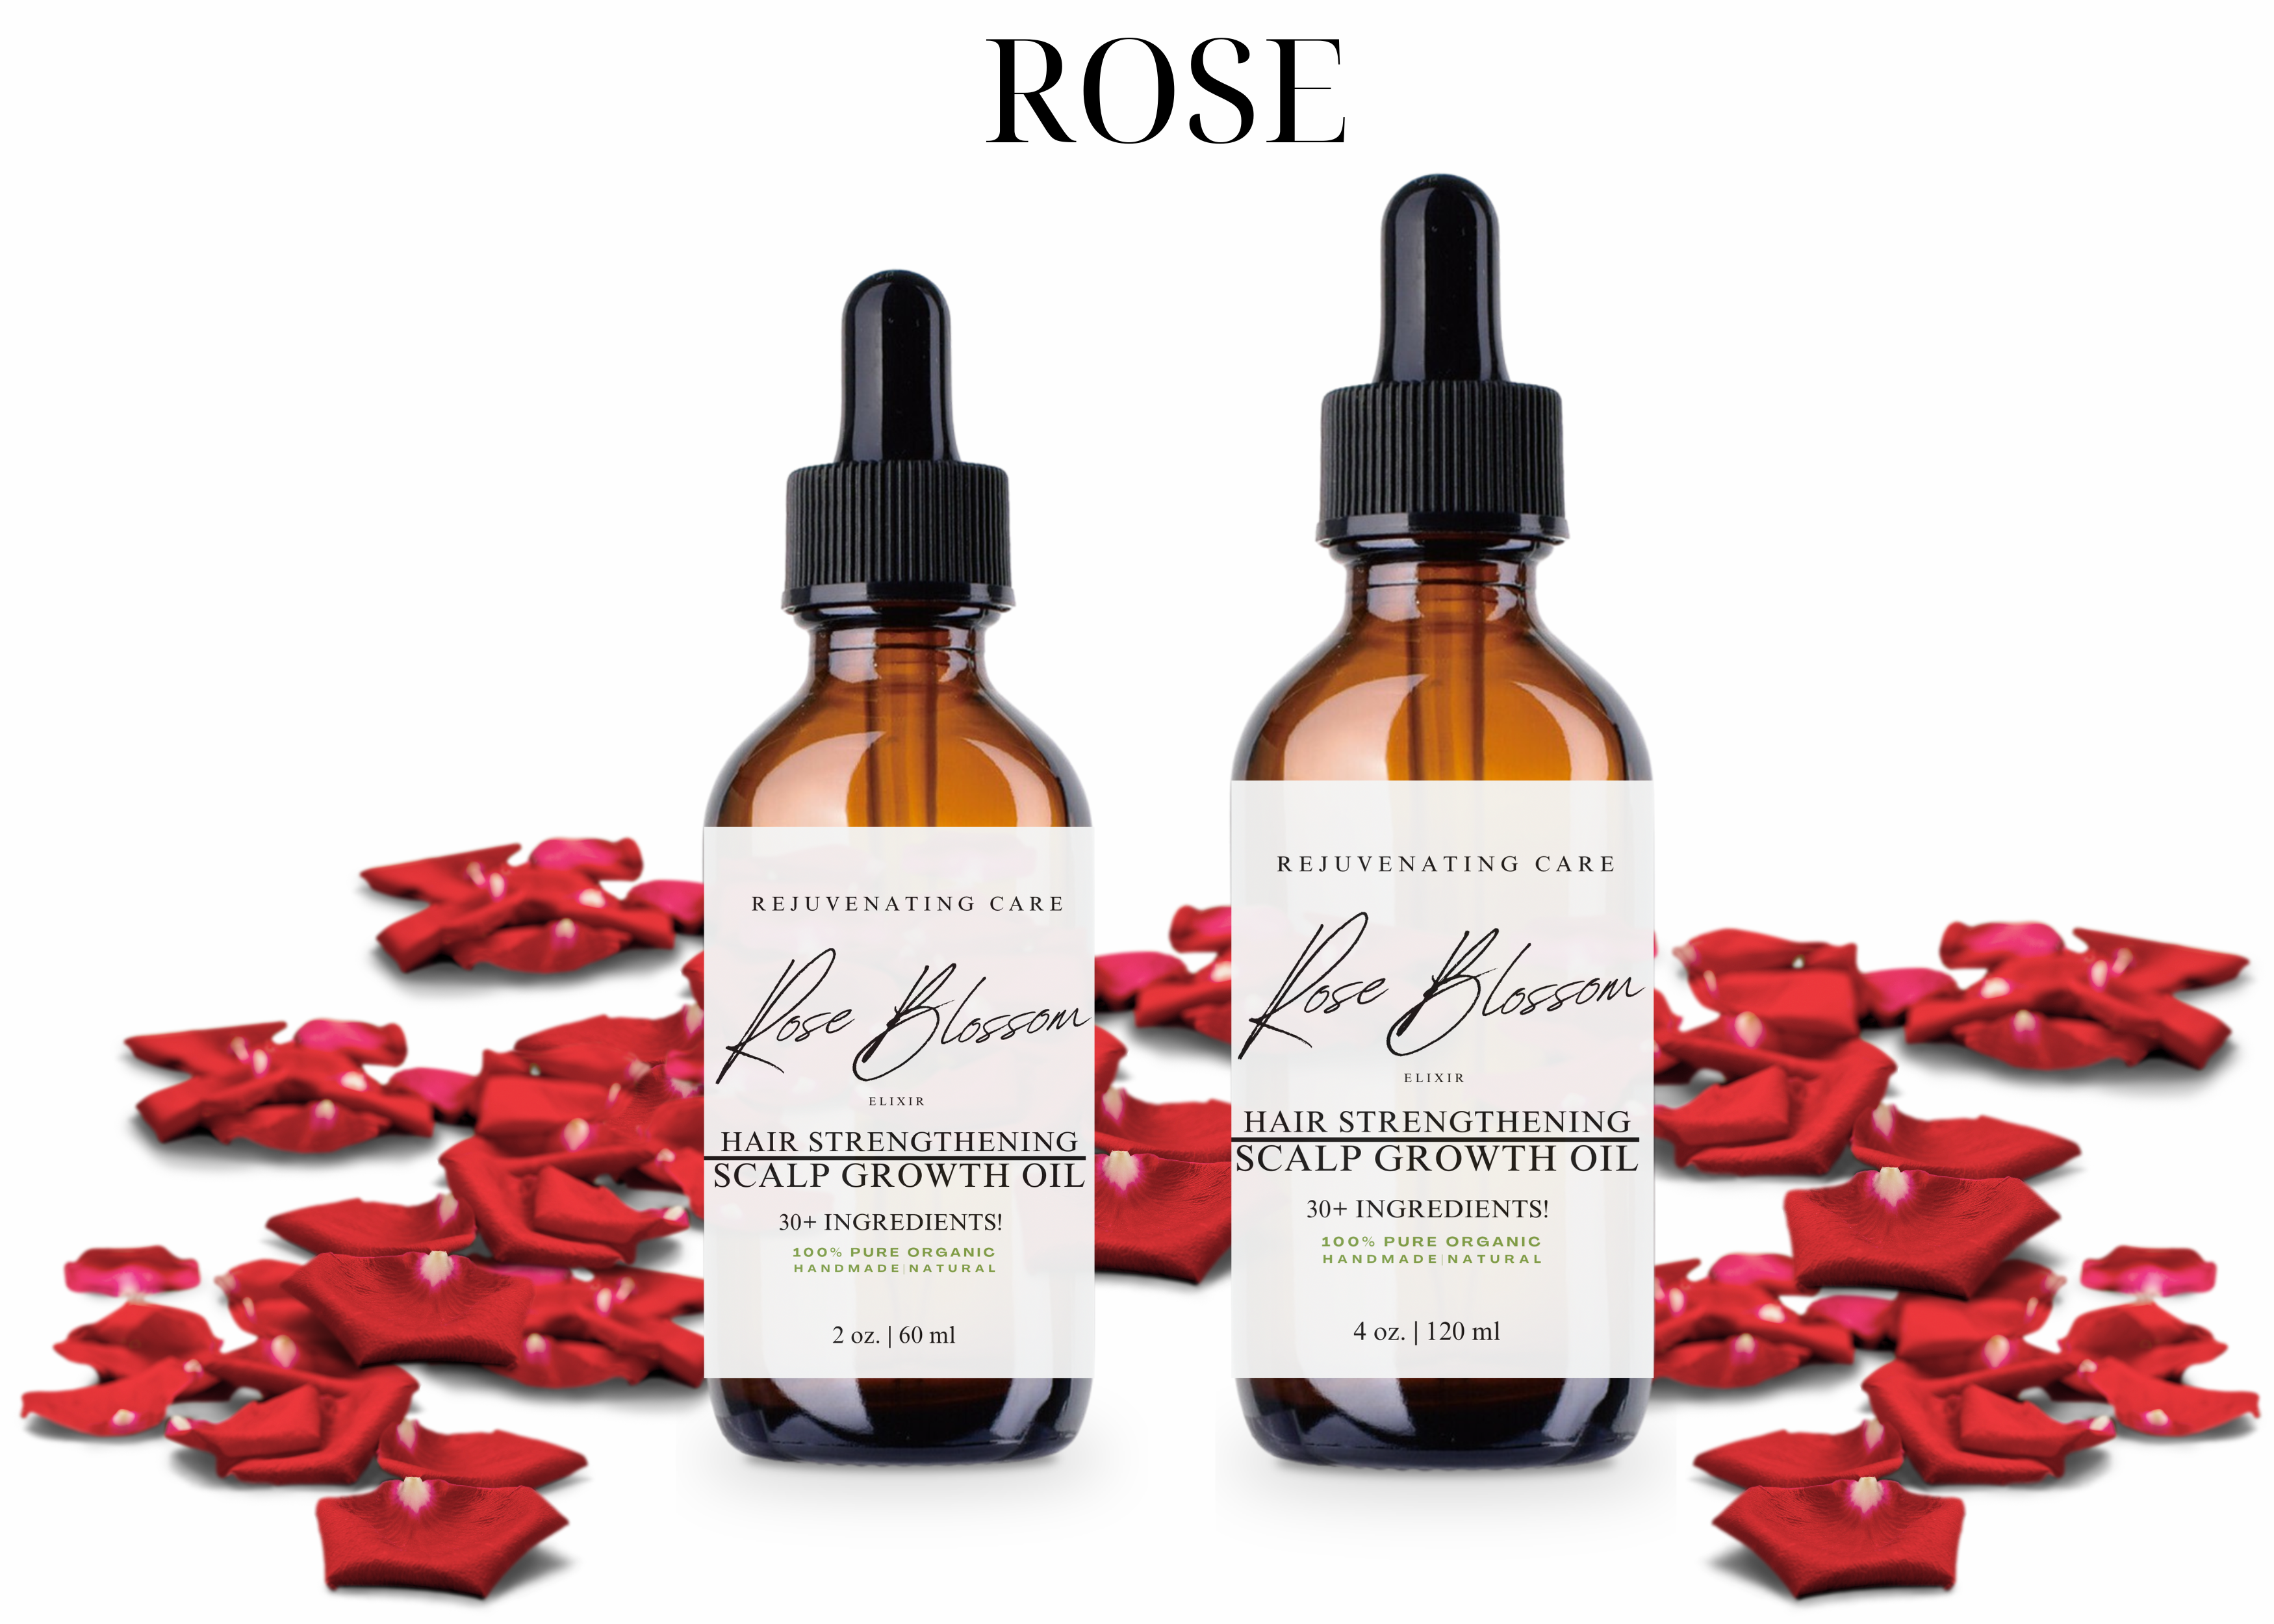 Rose Hair Strengthening and Scalp Growth Oil 2oz